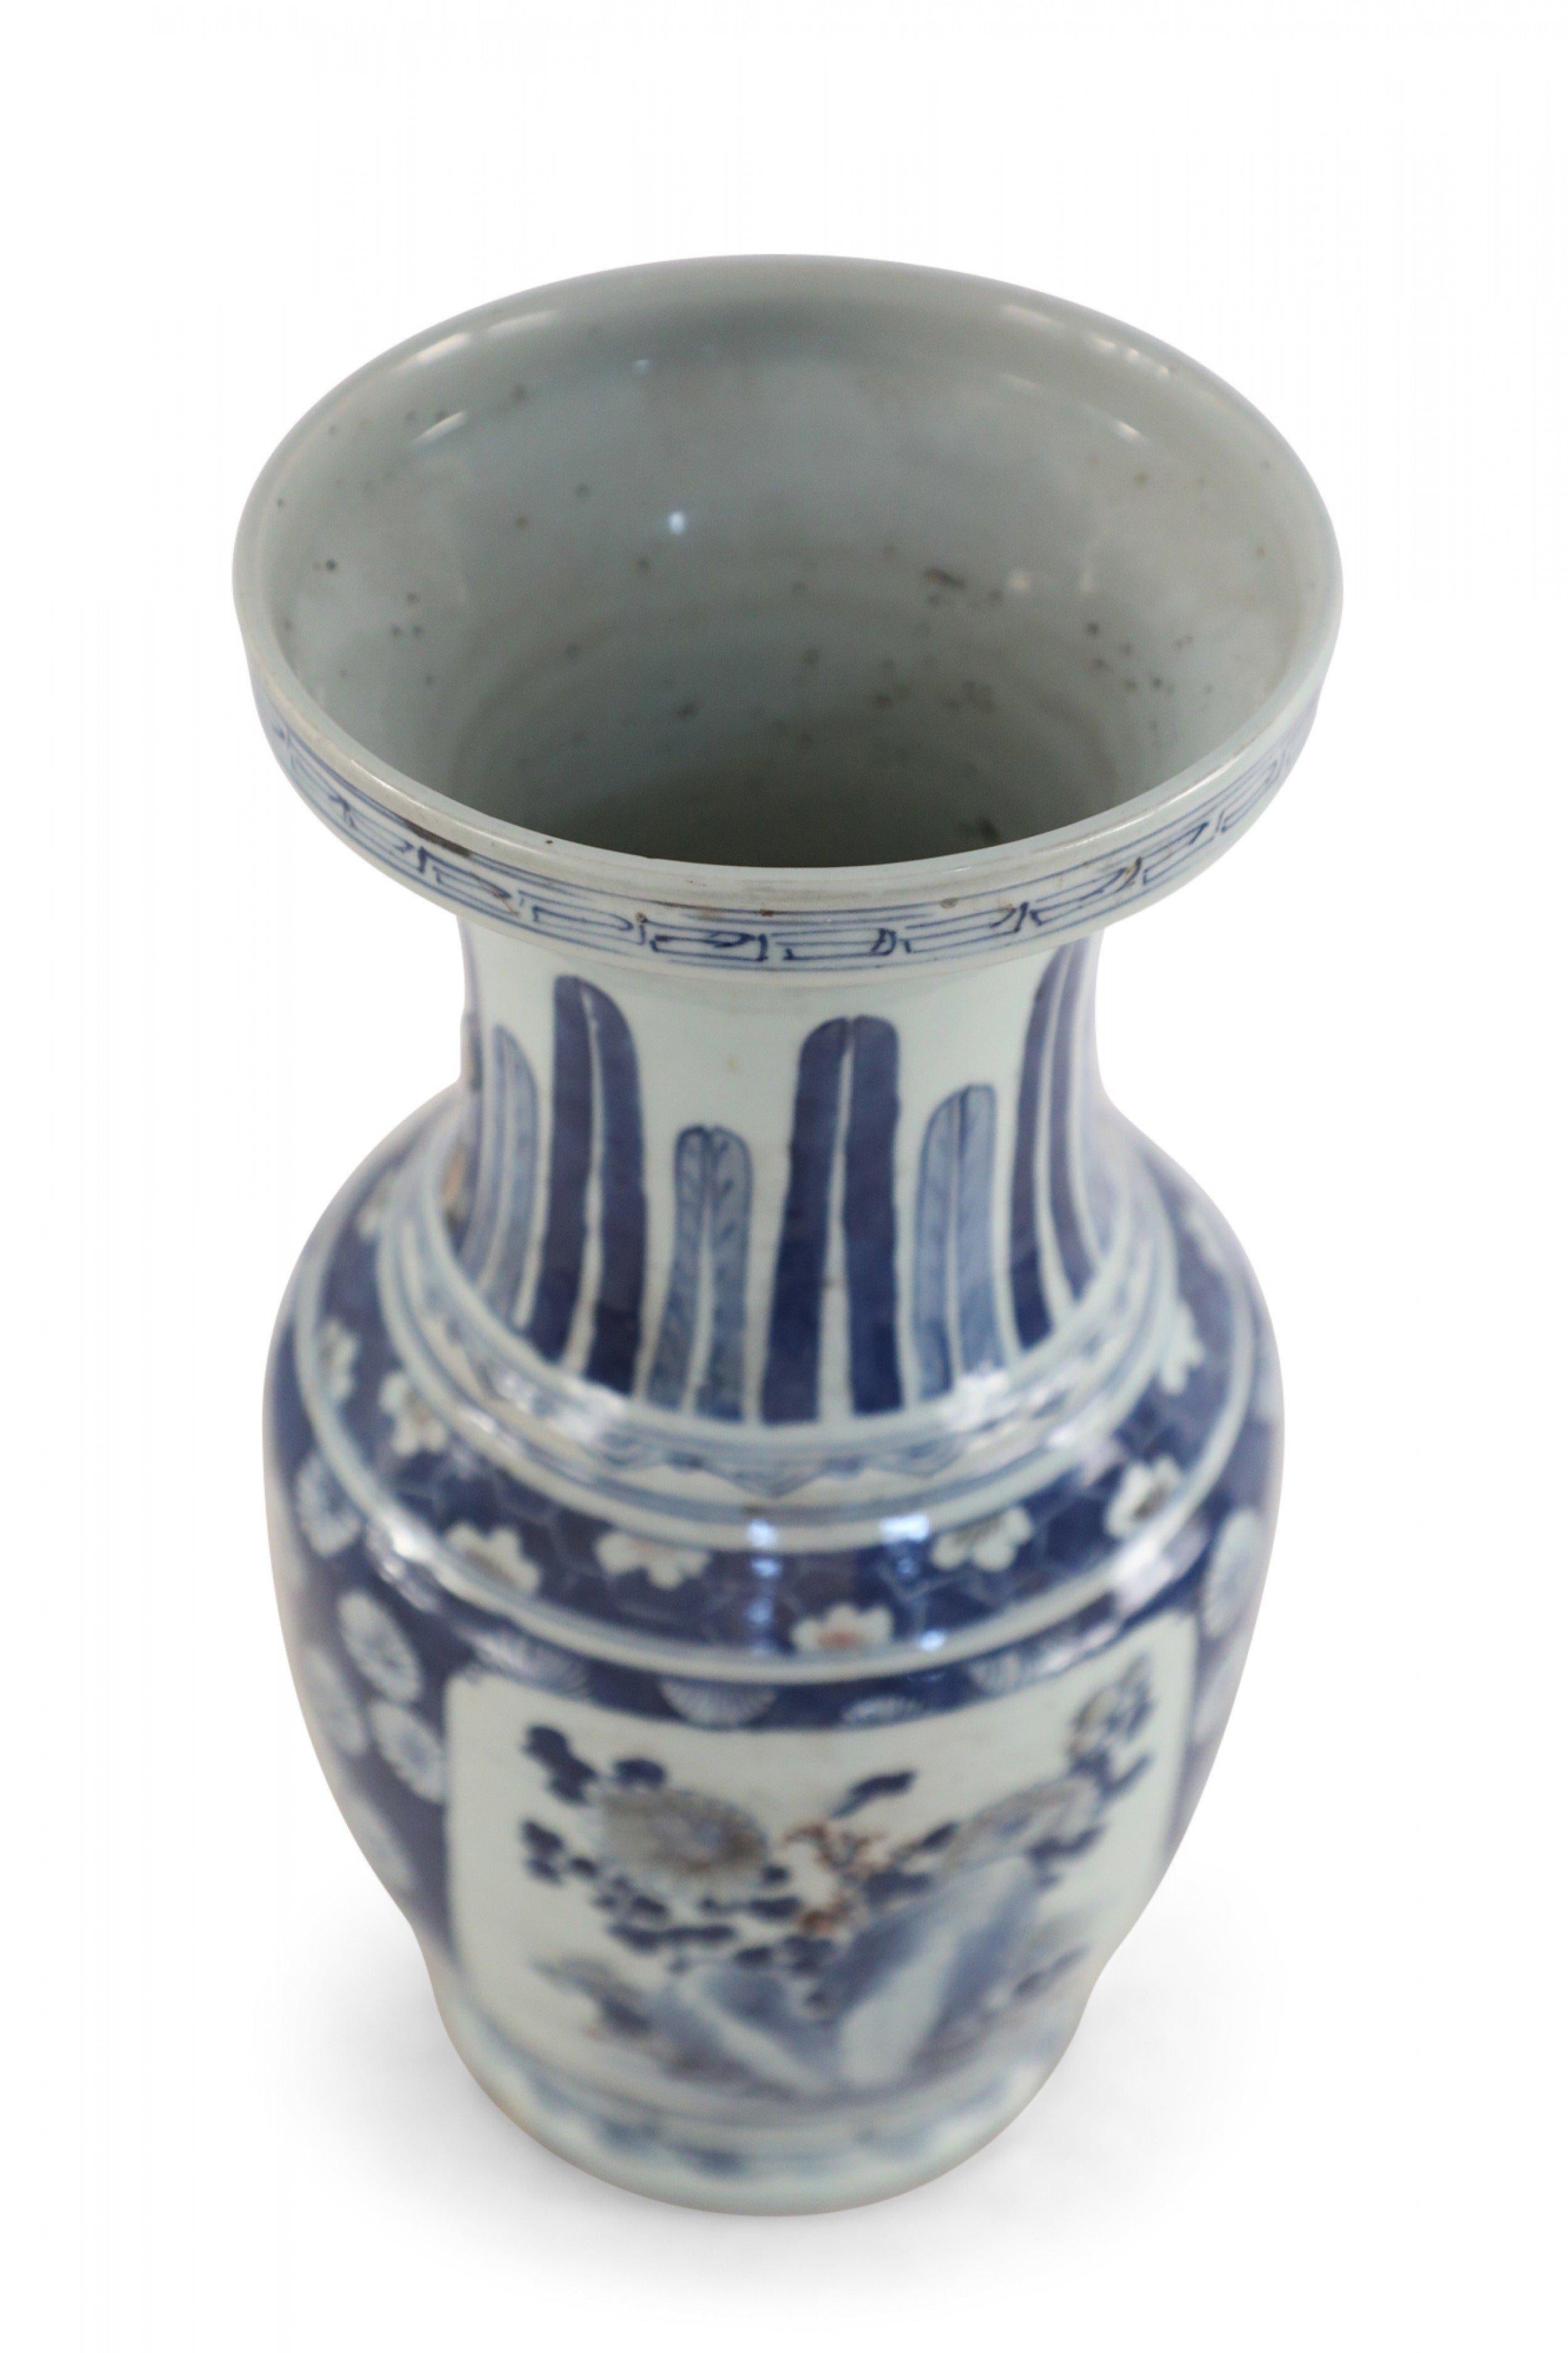 Chinese White and Blue Floral and Feather Motif Porcelain Urn For Sale 3